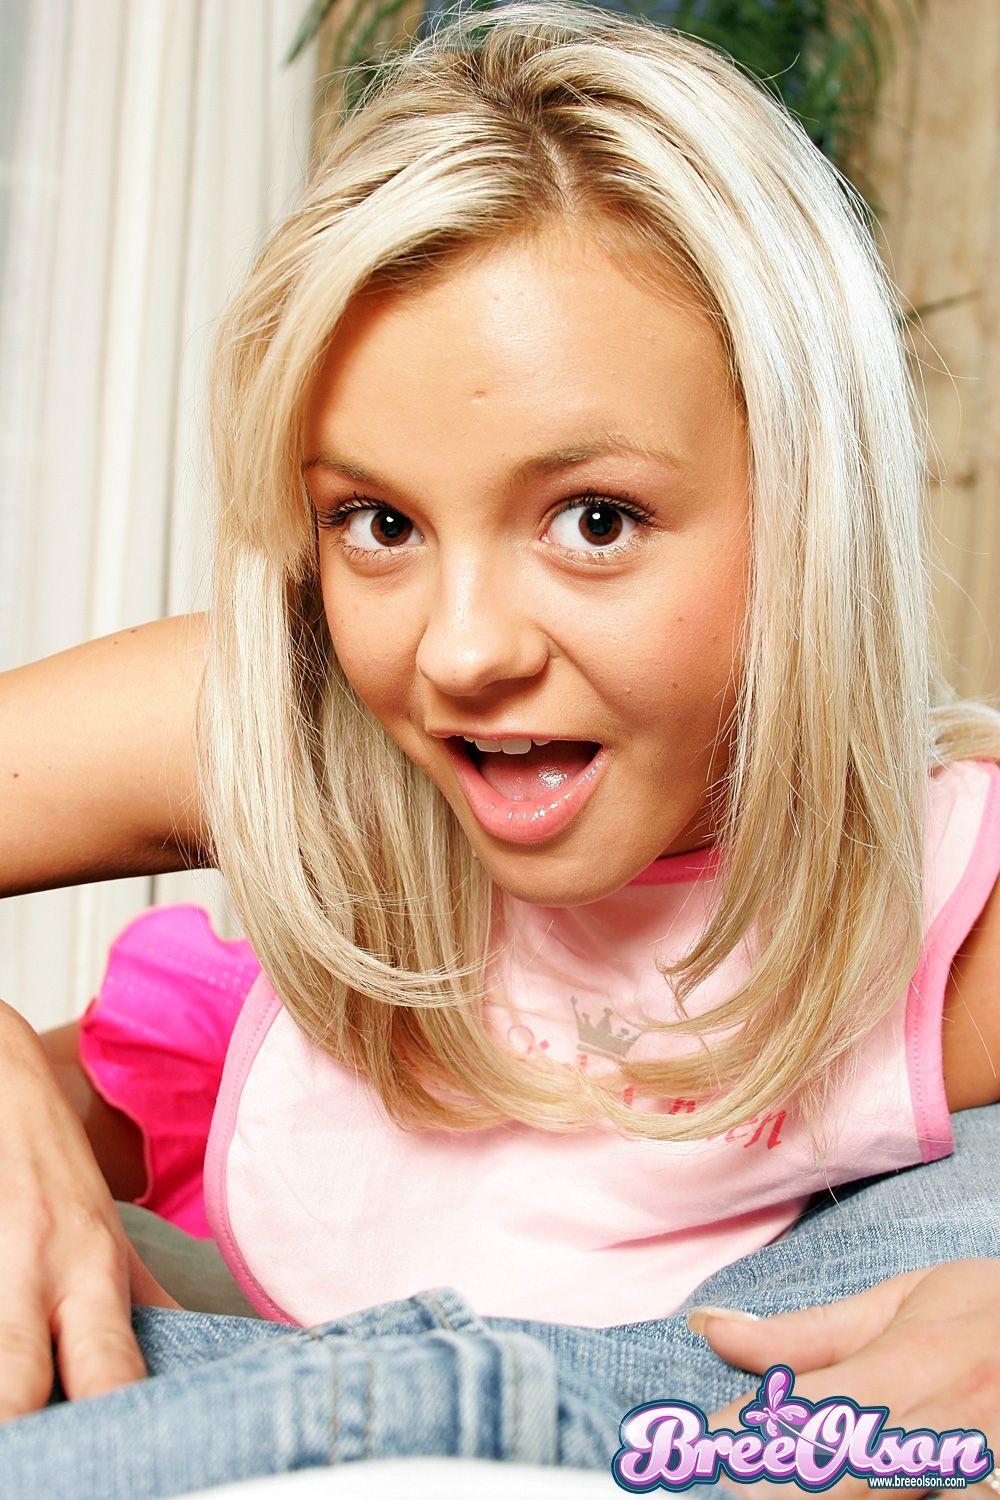 Pictures of teen Bree Olson going crazy for cock #53501333